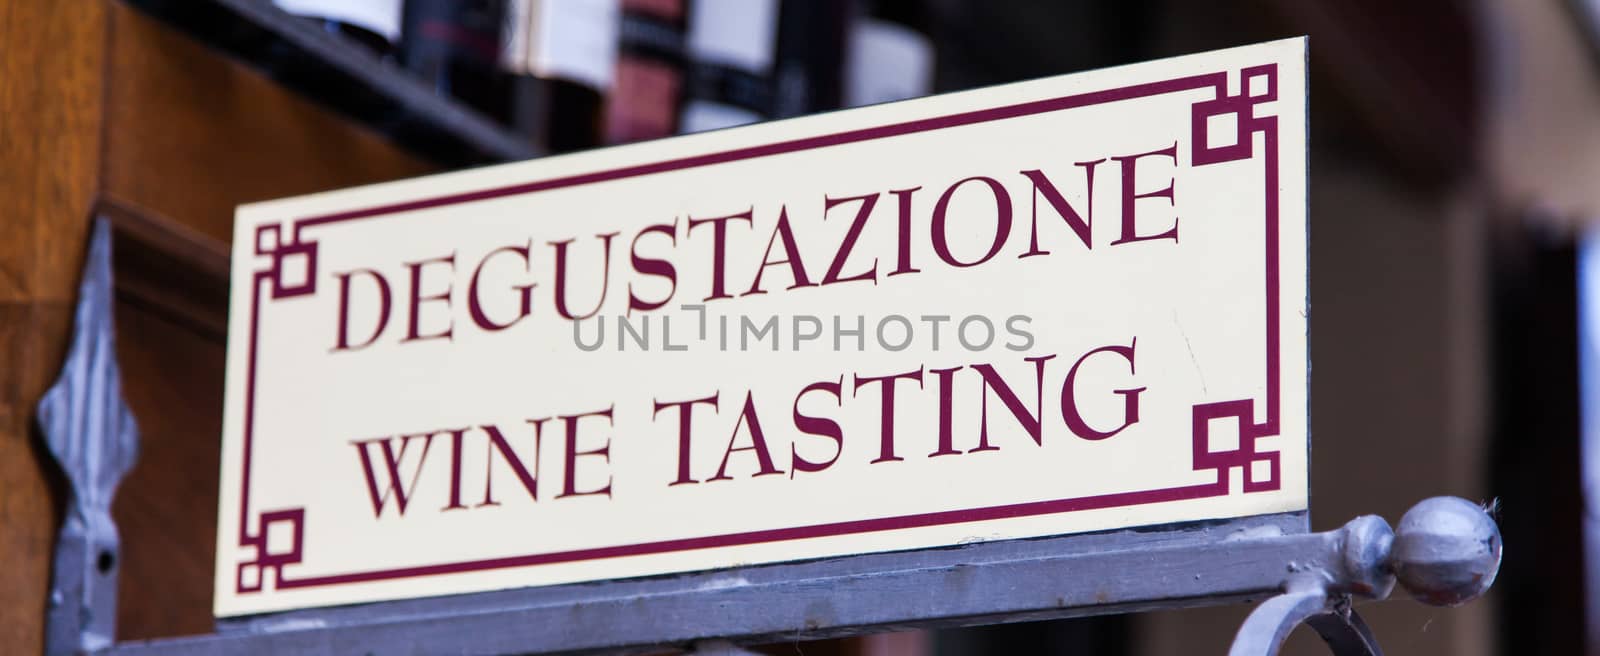 Signboard in an Italian wineshop, Orcia, Italy.